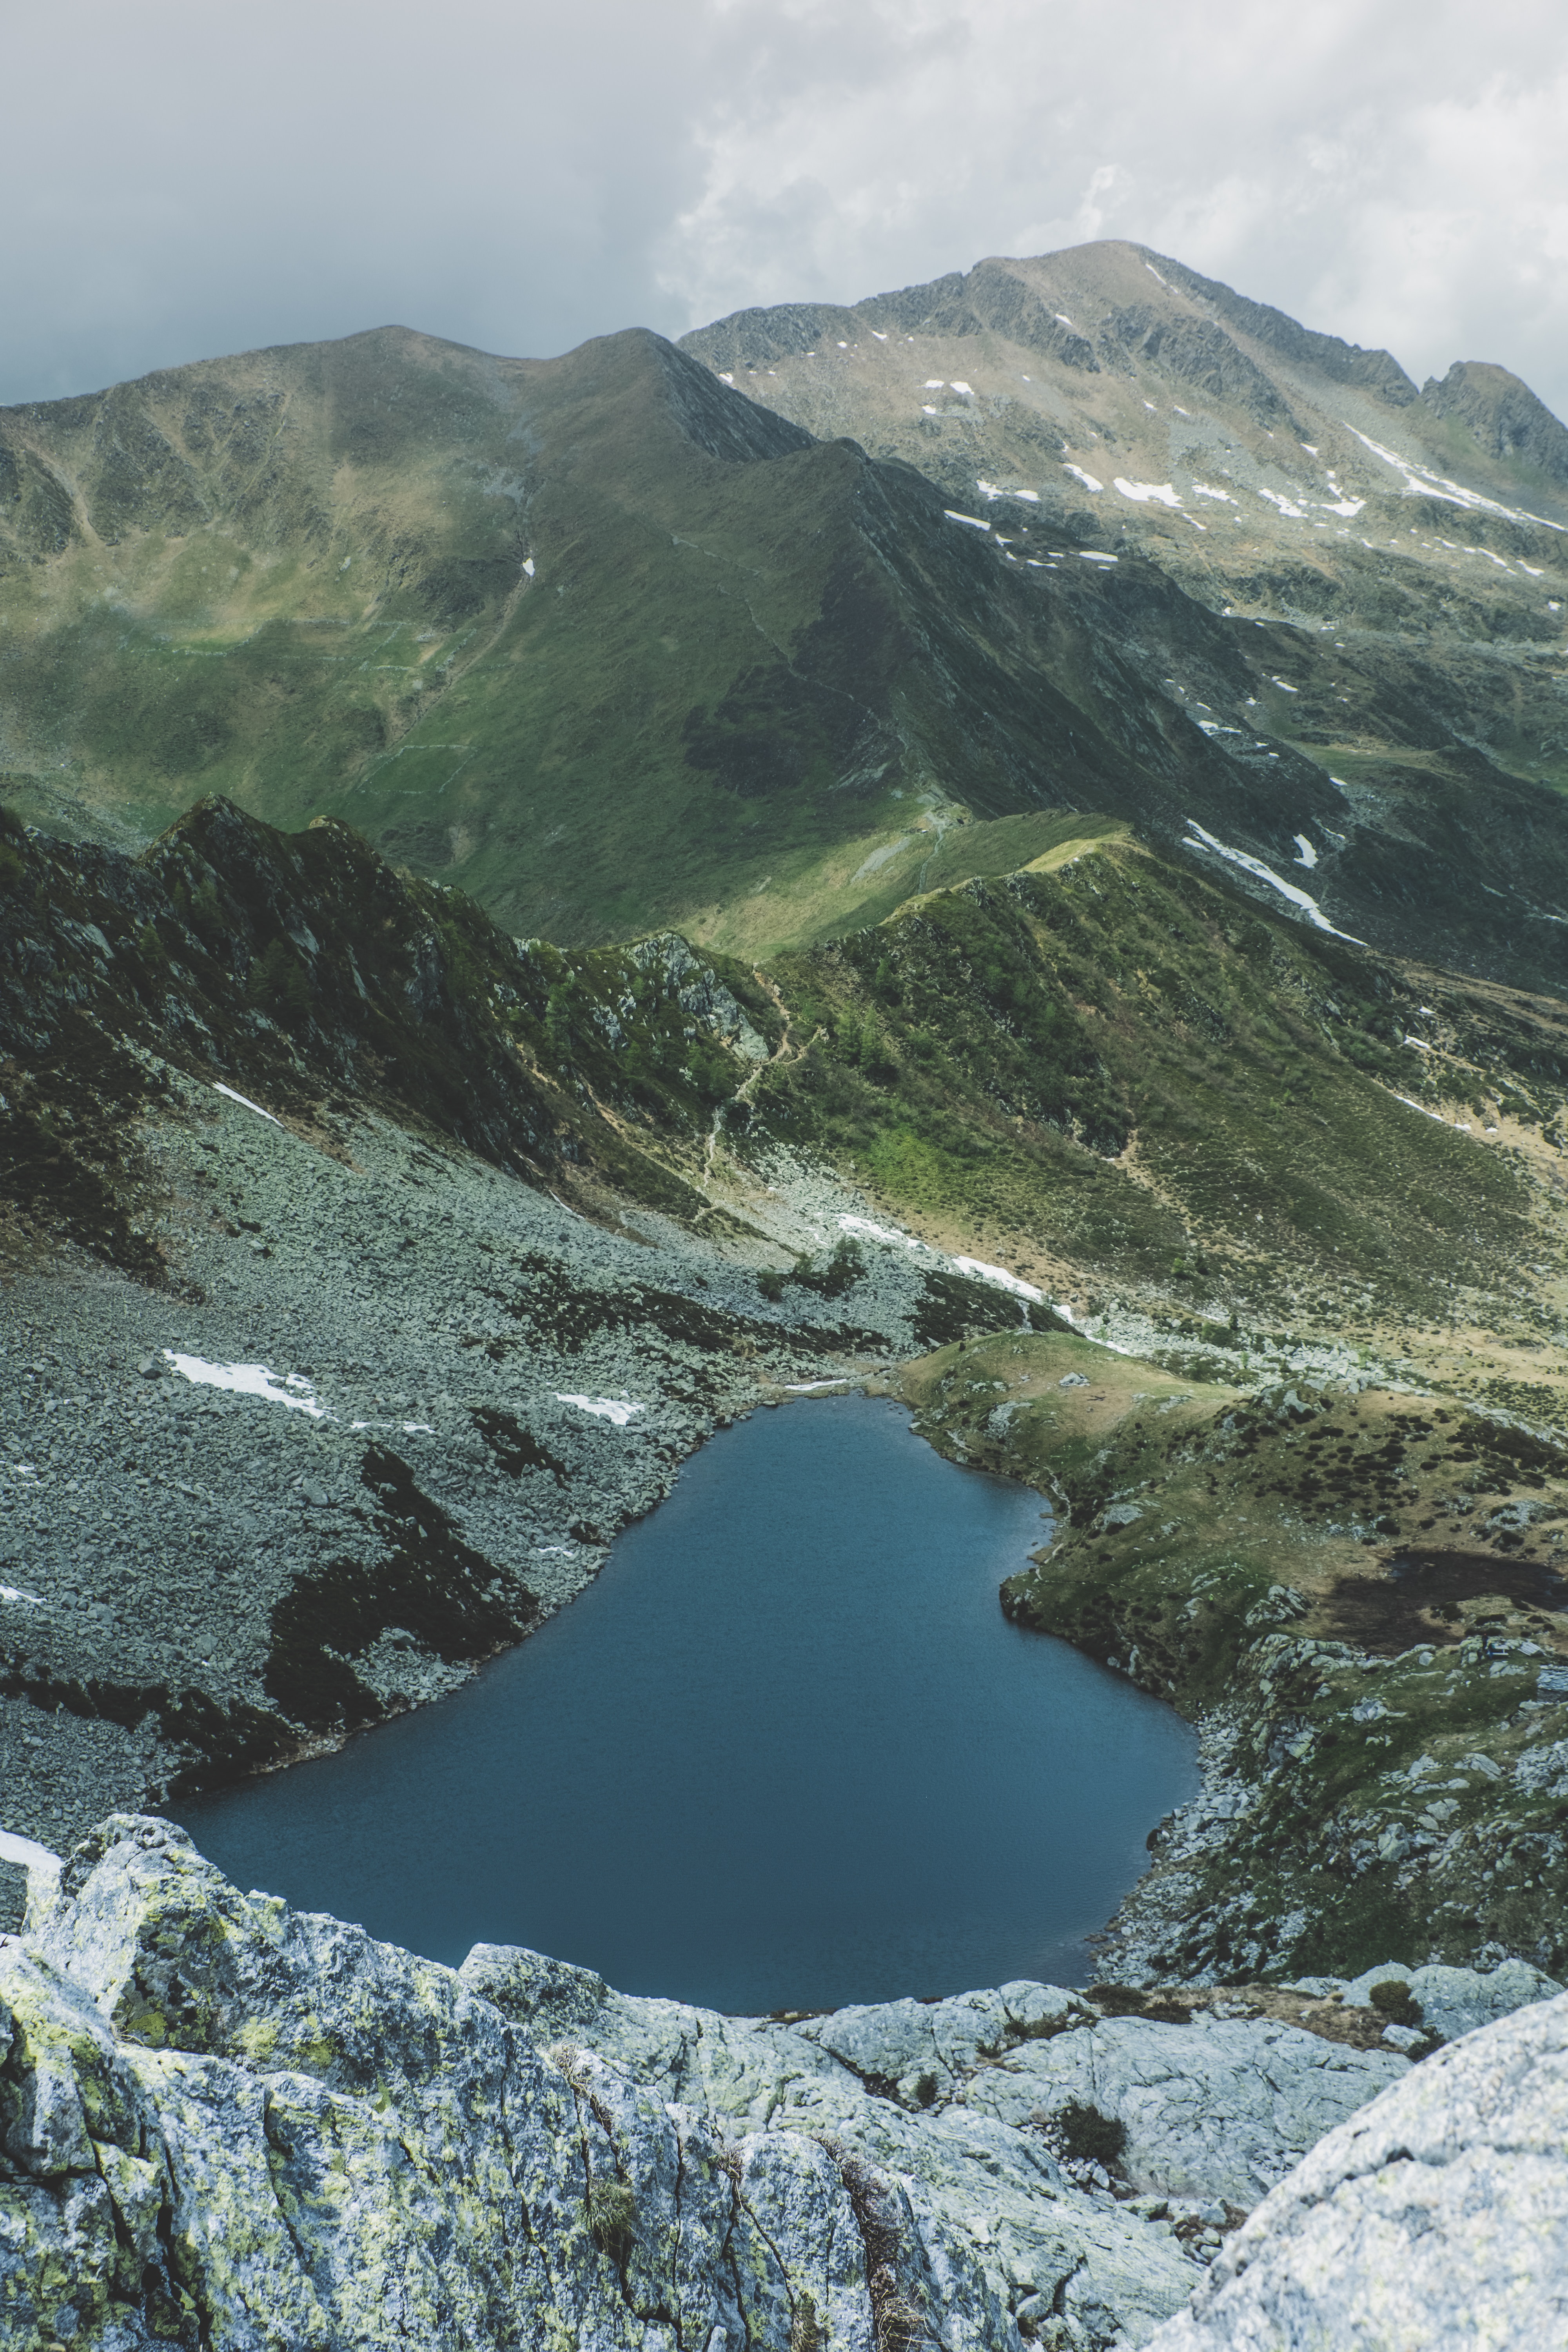 mountain range, landscape, nature, mountains, view from above, lake